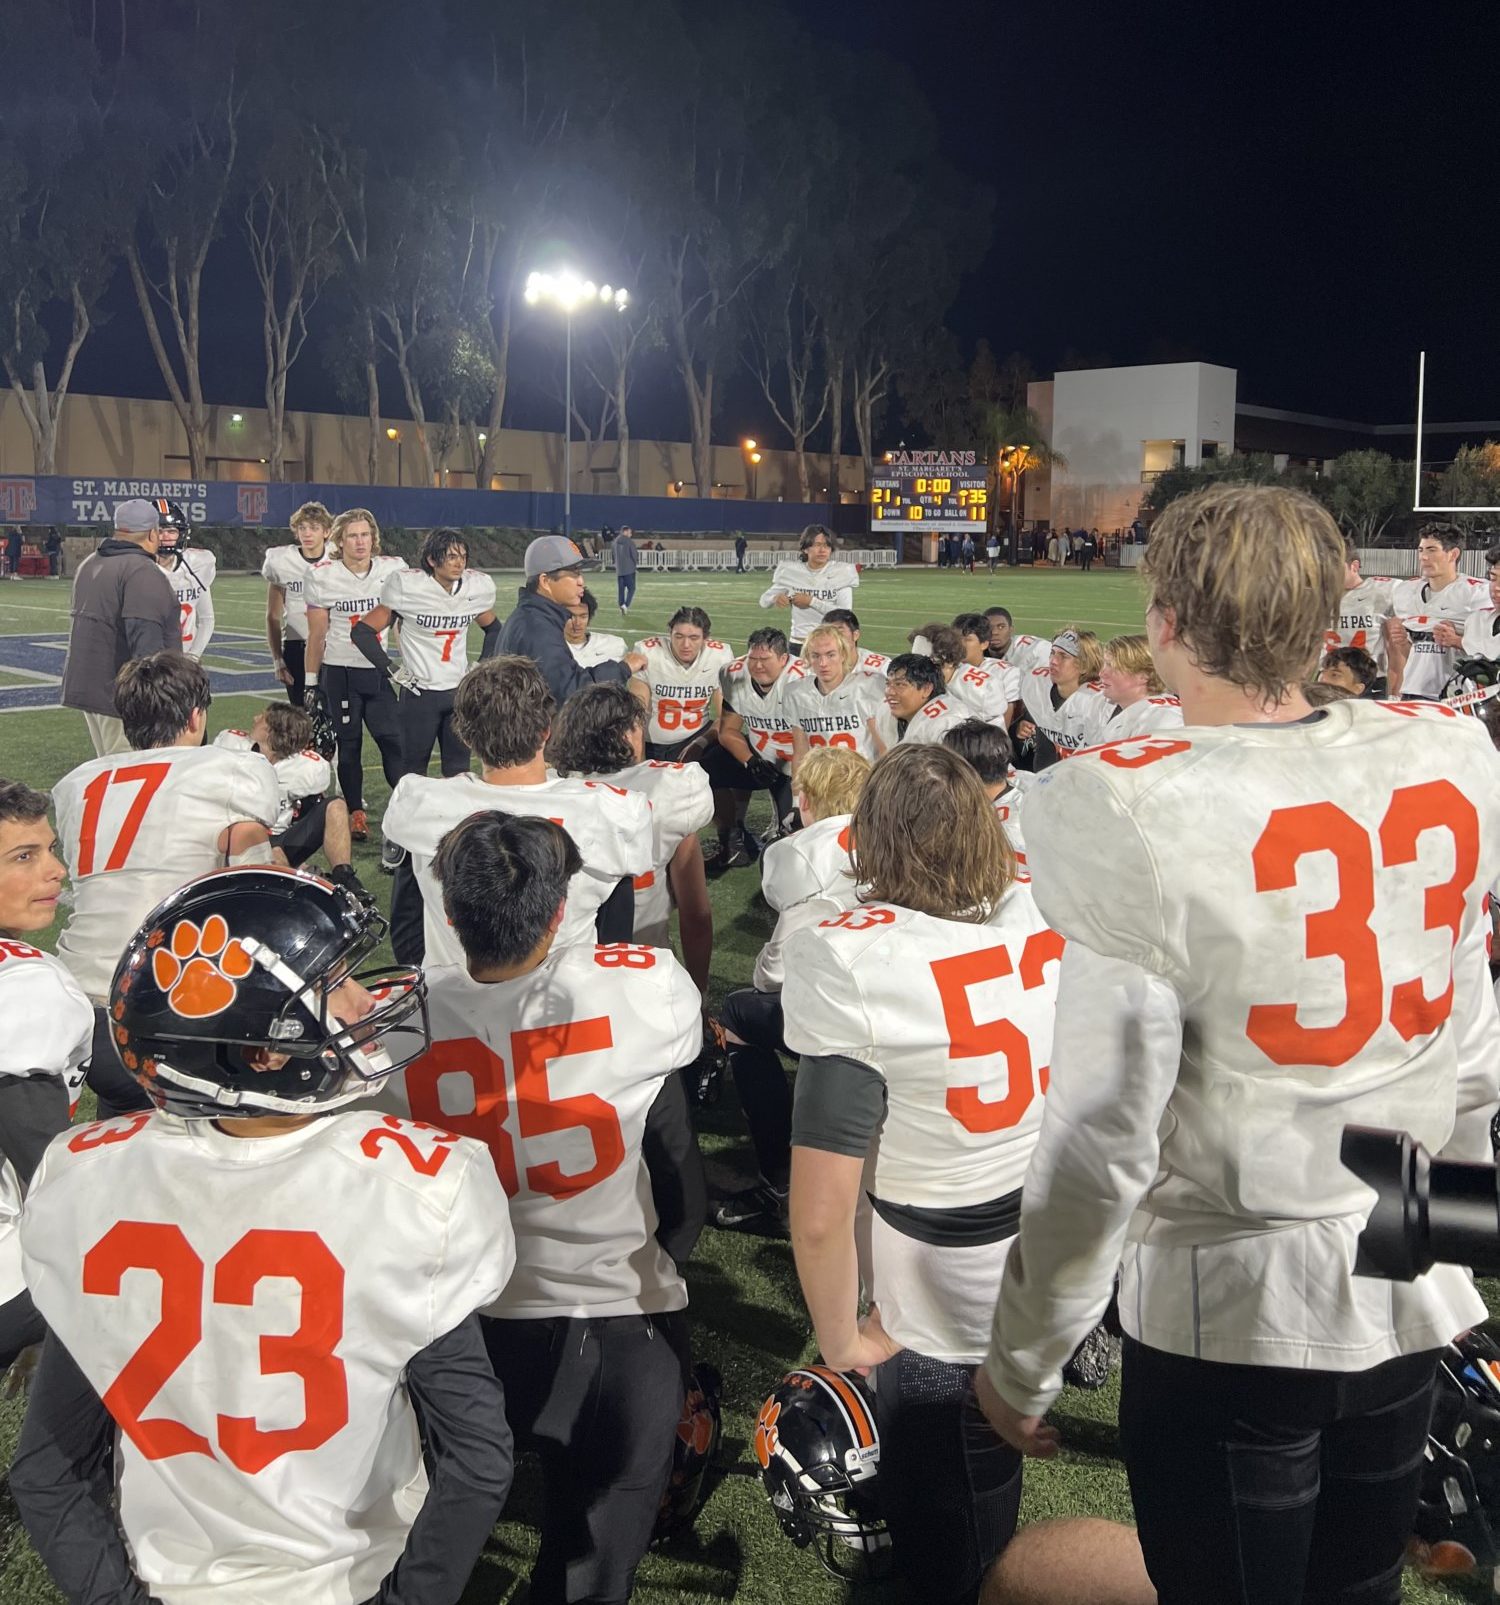 PHOTO: Anthony Chan | SPHS Tigers Football | coach Jeff Chi talking to his team after 35-21 CIF quarterfinal victory over St. Margaret’s Friday night.